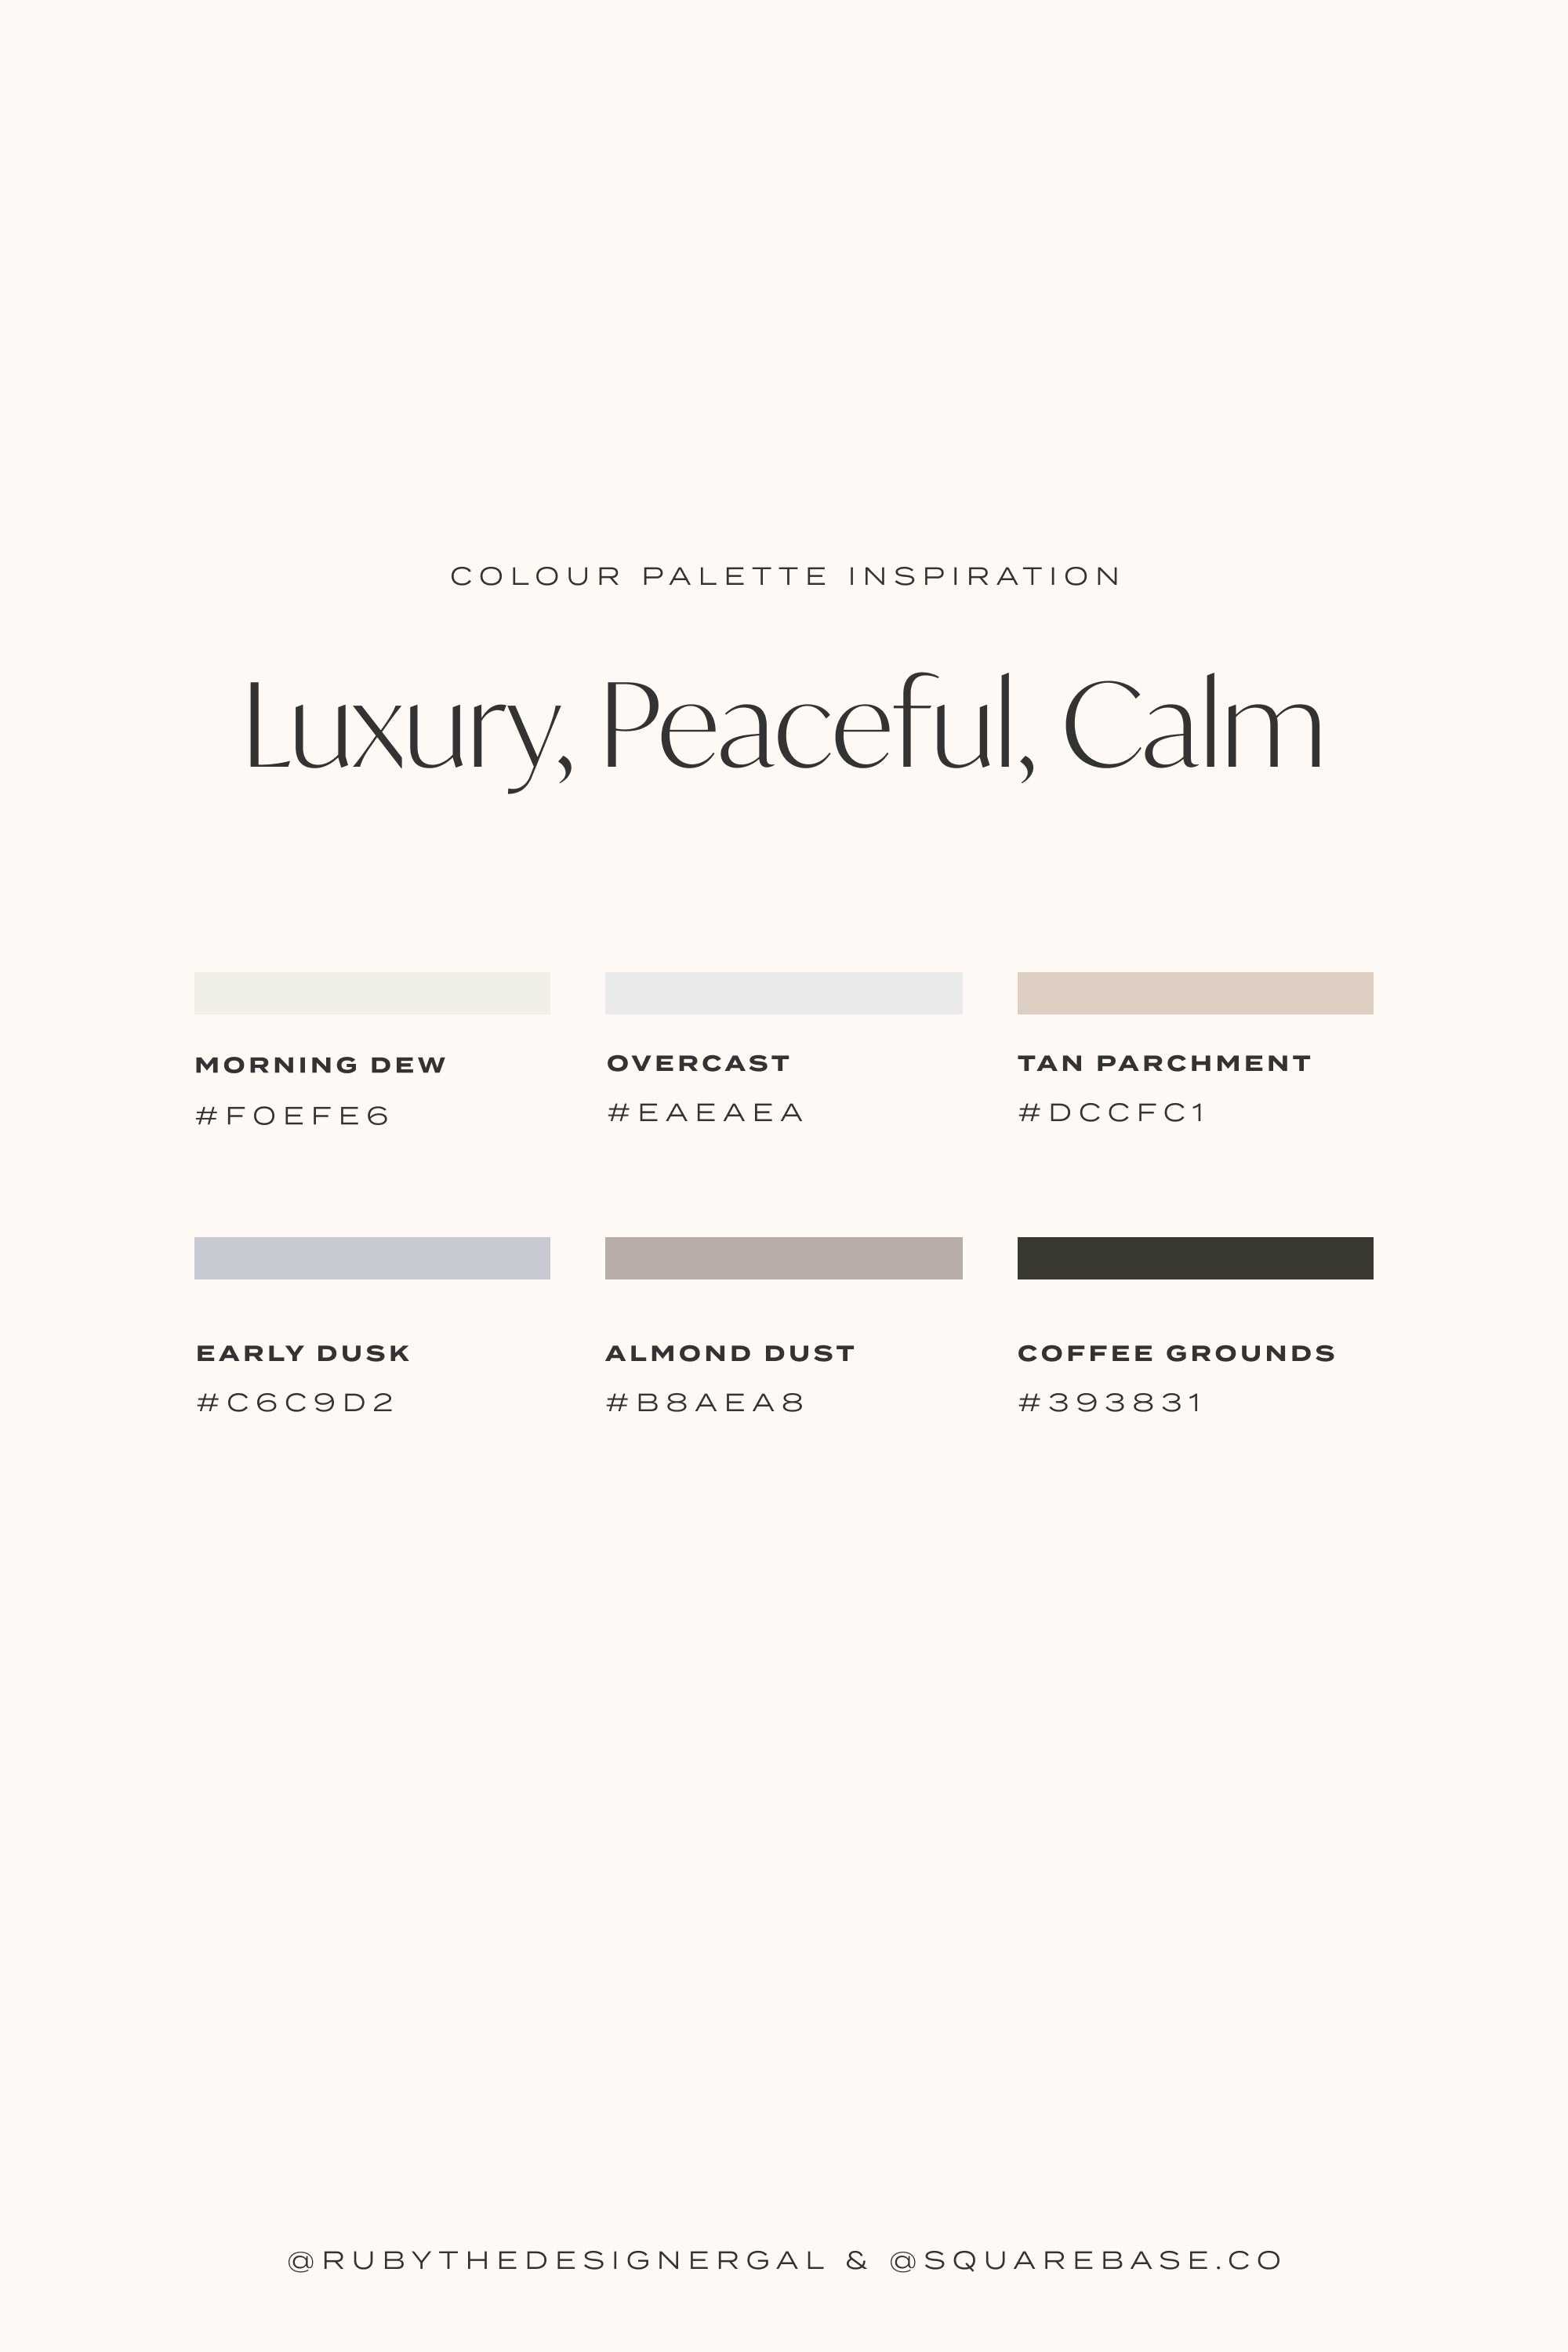 Luxury, Peaceful and Calm - Luxury Colour Palettes for Your Brand